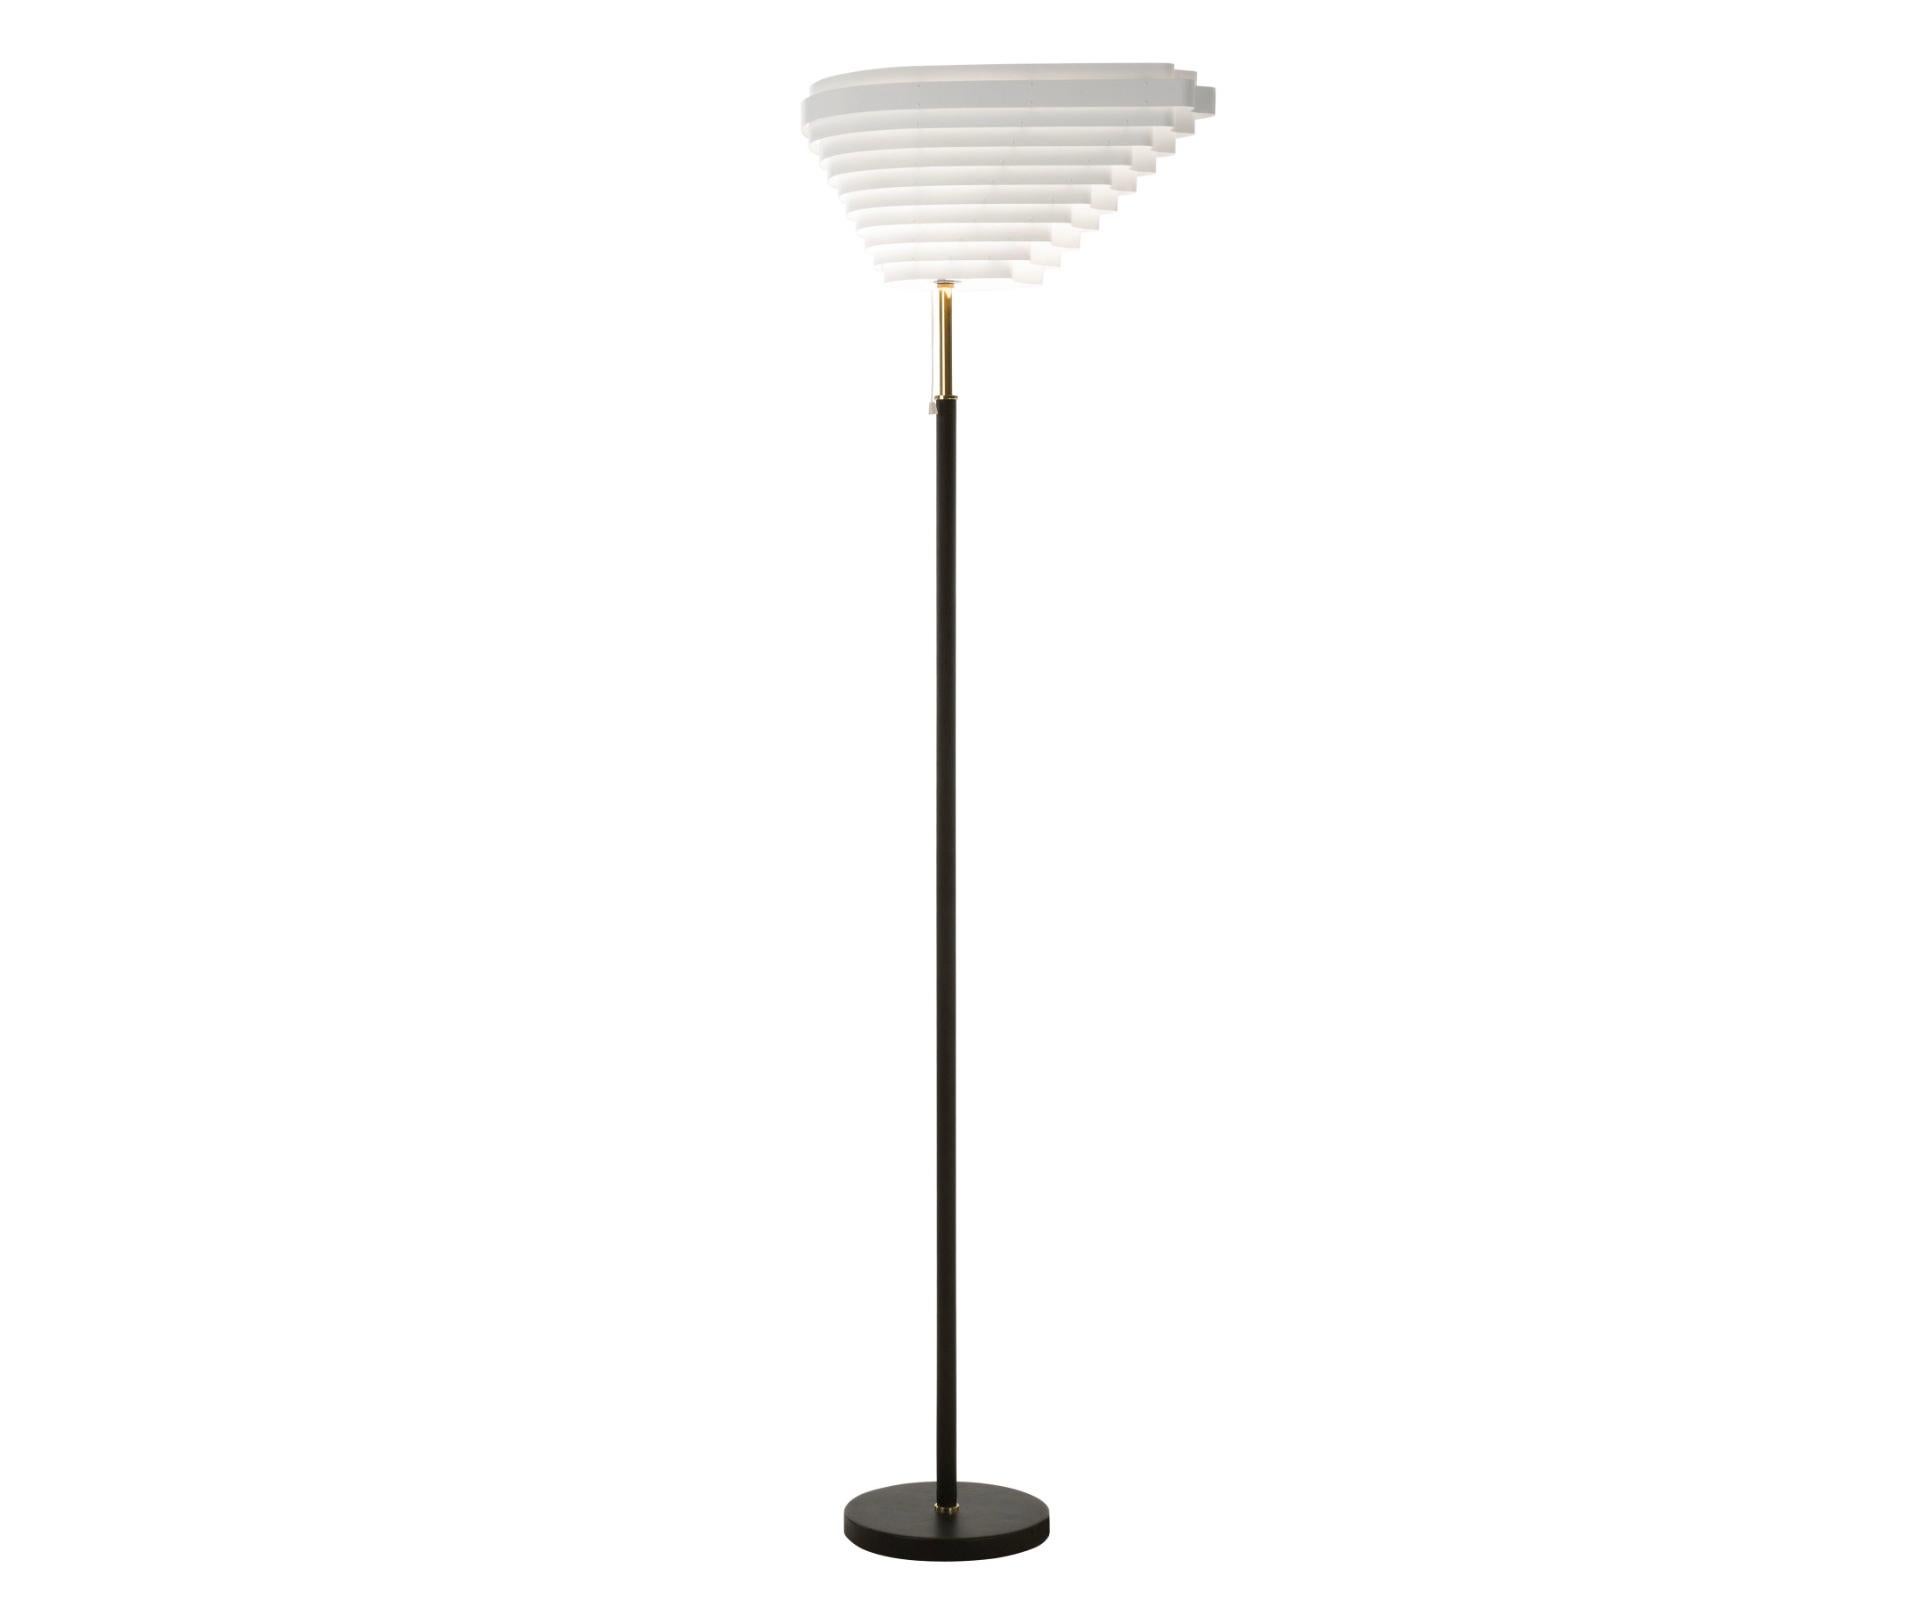 Alvar Aalto A805 ‘Angel Wing’ Floor Lamp for Artek. Designed in 1954. New, current production.

Floor Light A805 features a hand-riveted shade formed from delicate, lacquered metal strips. It presents a striking combination of lines and curves while